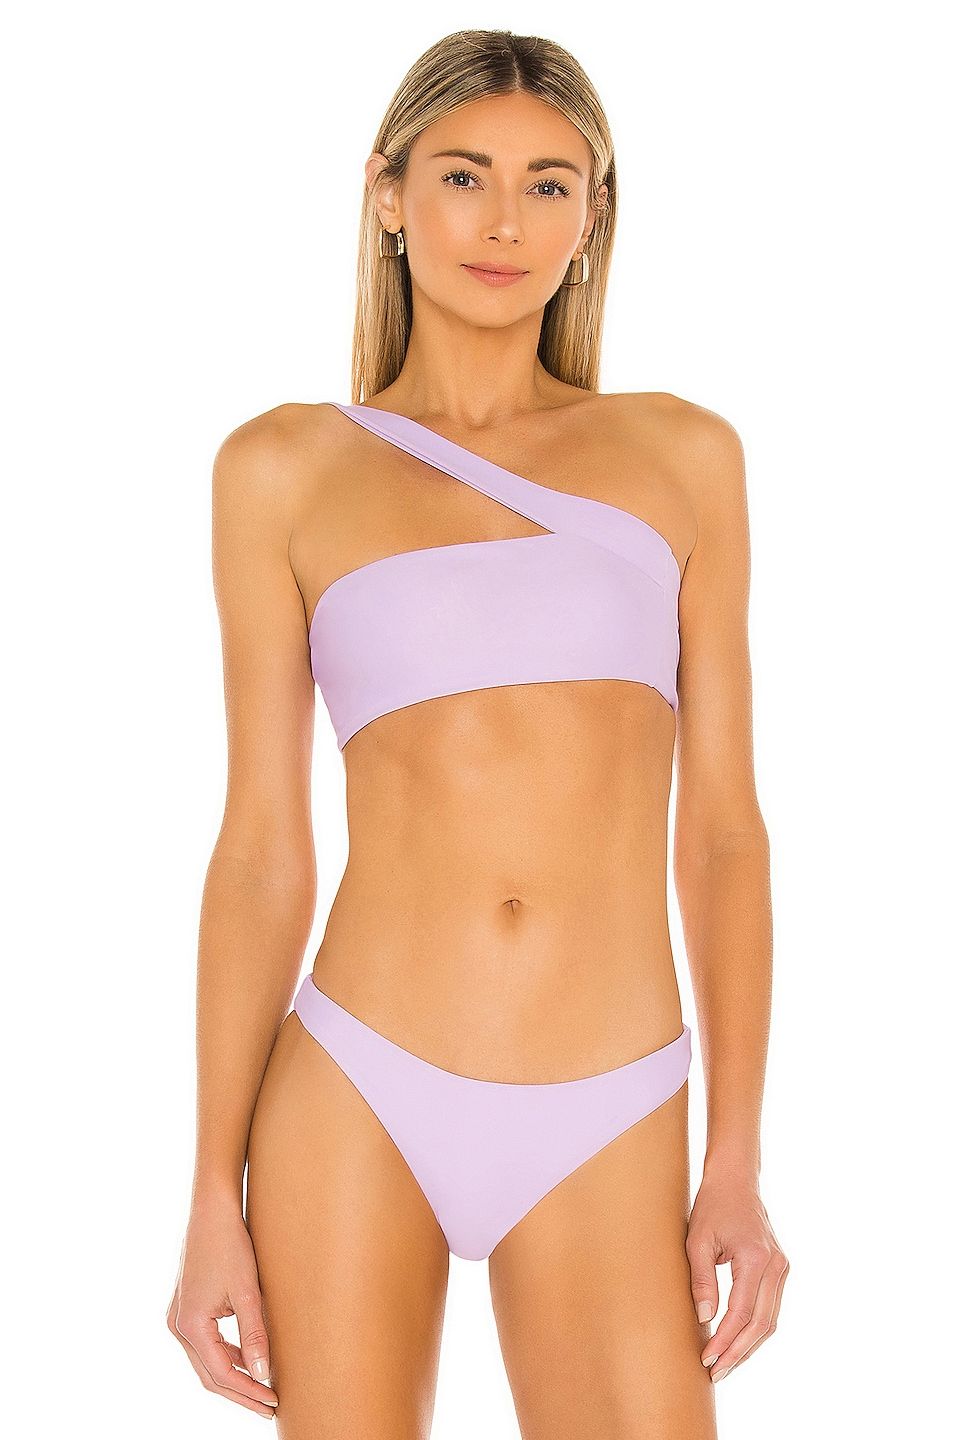 9 Swimsuits Anyone With Small Boobs Should Buy Immediately